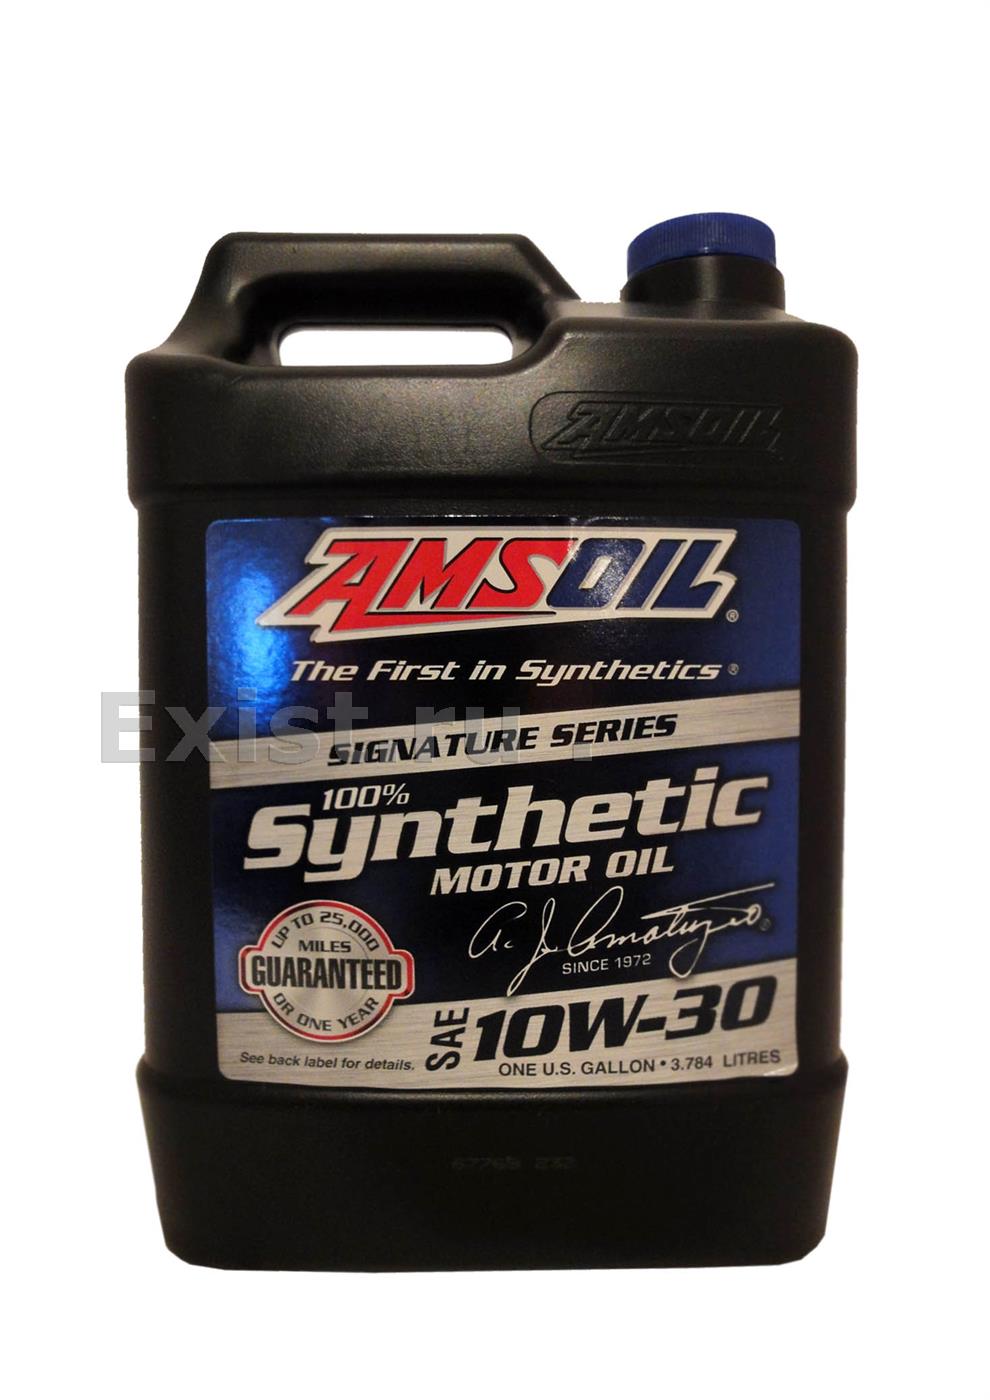 Amsoil ATM1GМасло моторное синтетическое Signature Series Synthetic Motor Oil 10W-30, 3.784л